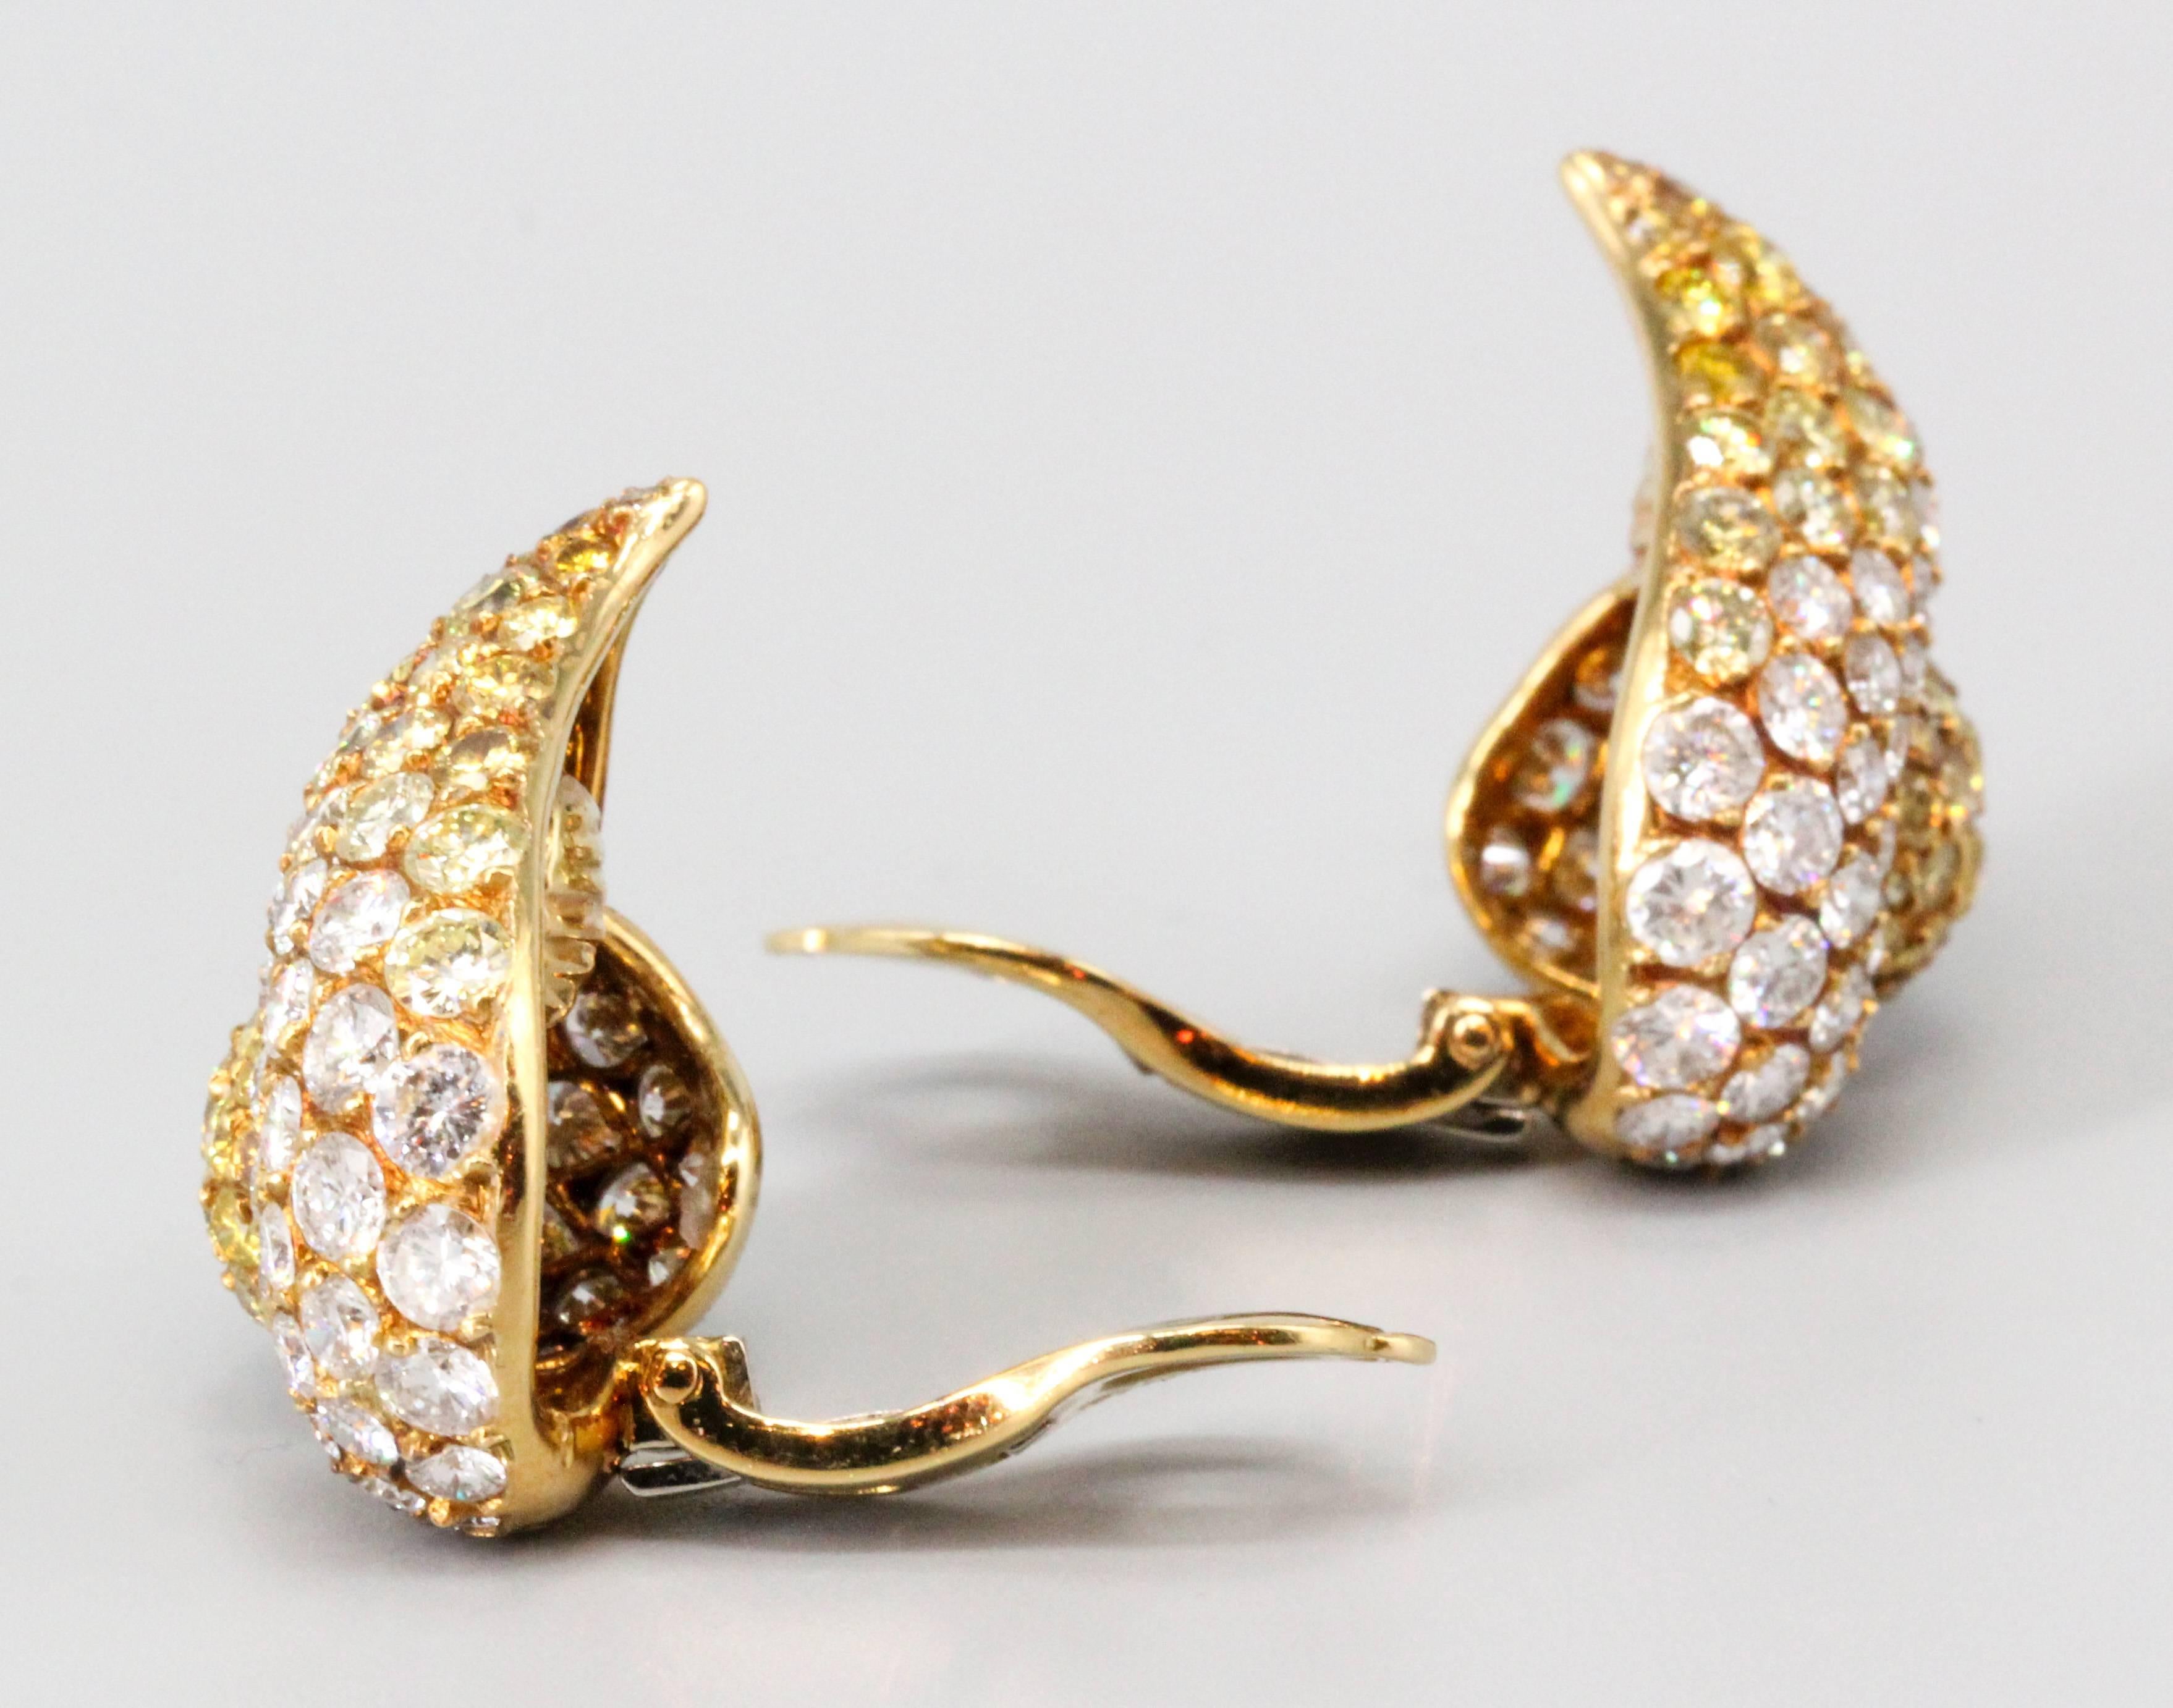 Very fine yellow and white diamond earrings set in 18K yellow gold by Gioia. The earrings are of abstract design, and feature approx. 9.0-10.0cts of high grade round brilliant cut diamonds of white and natural fancy yellow color. They show